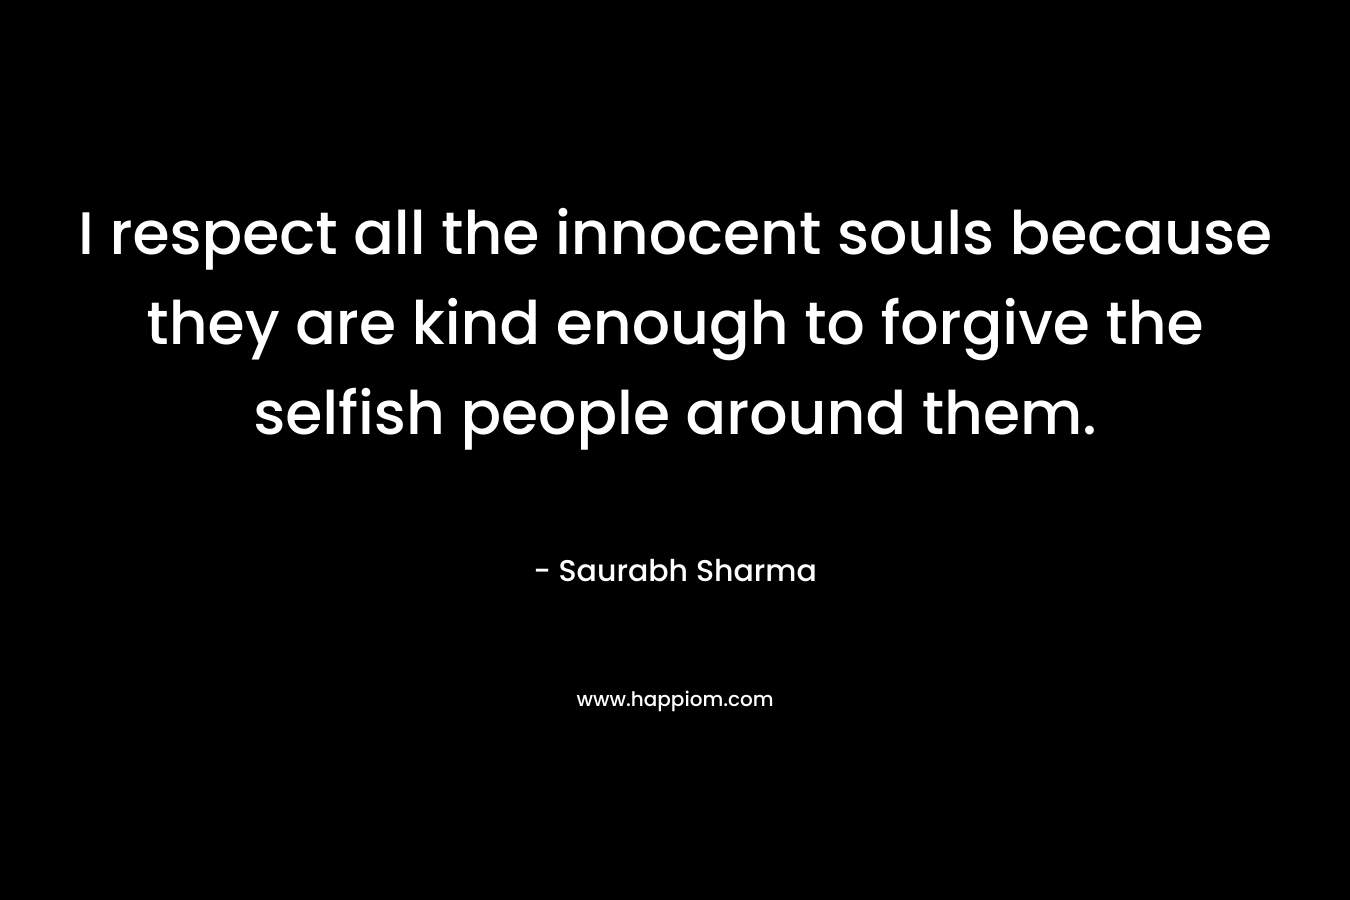 I respect all the innocent souls because they are kind enough to forgive the selfish people around them. – Saurabh Sharma